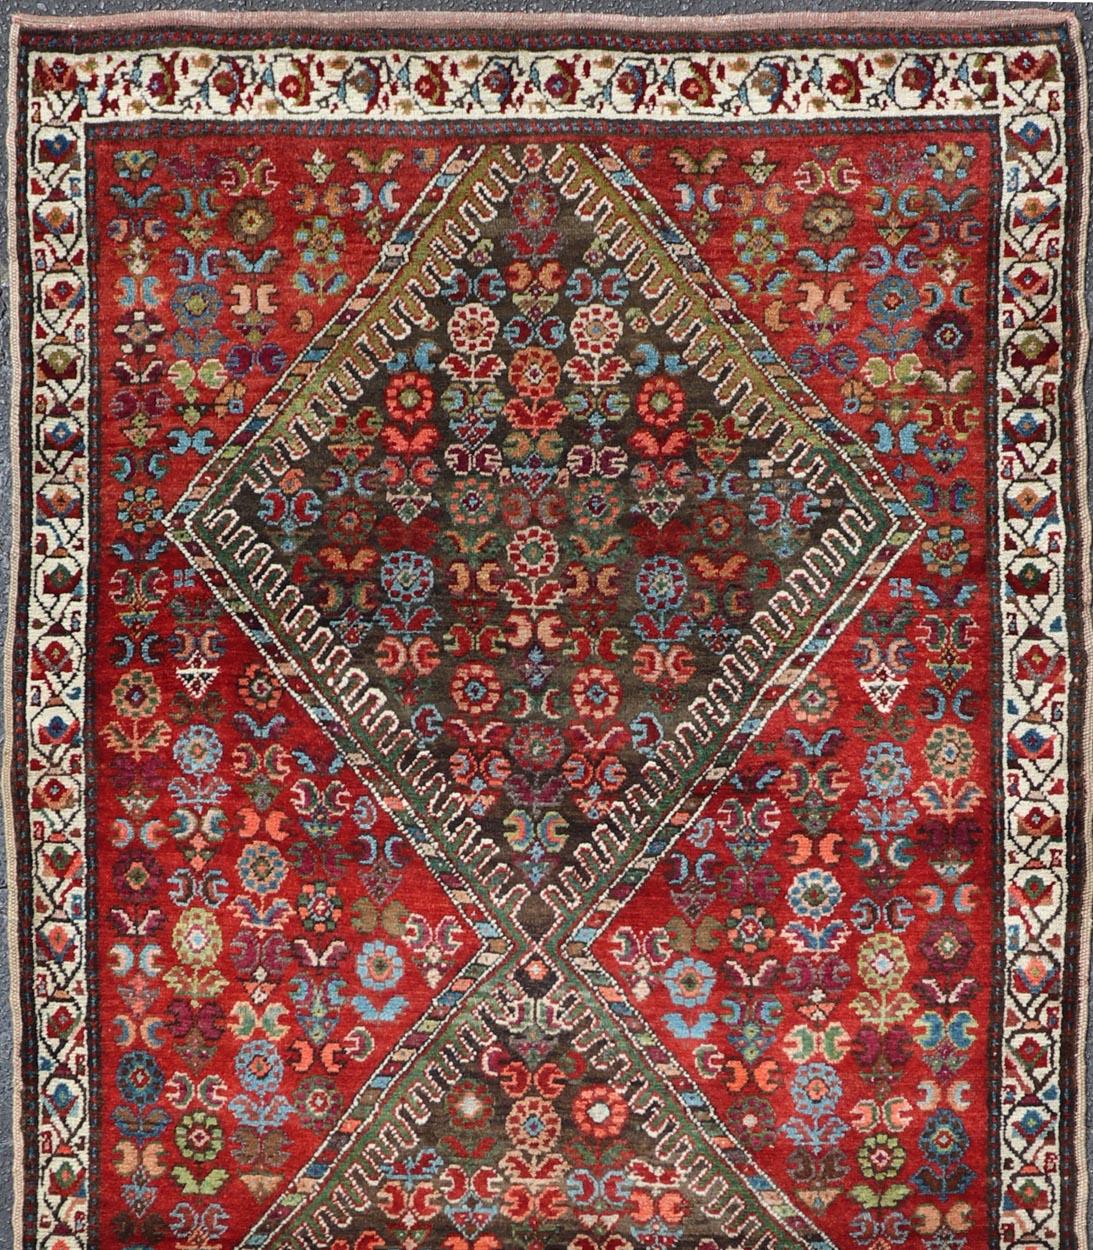 Colorful jewel-toned antique Caucasian Karabagh runner with tribal design, rug E-0704, country of origin / type: Caucasus / Karabagh, circa 1900.

The field design of this antique Karabagh runner (circa early 20th century) features medallions